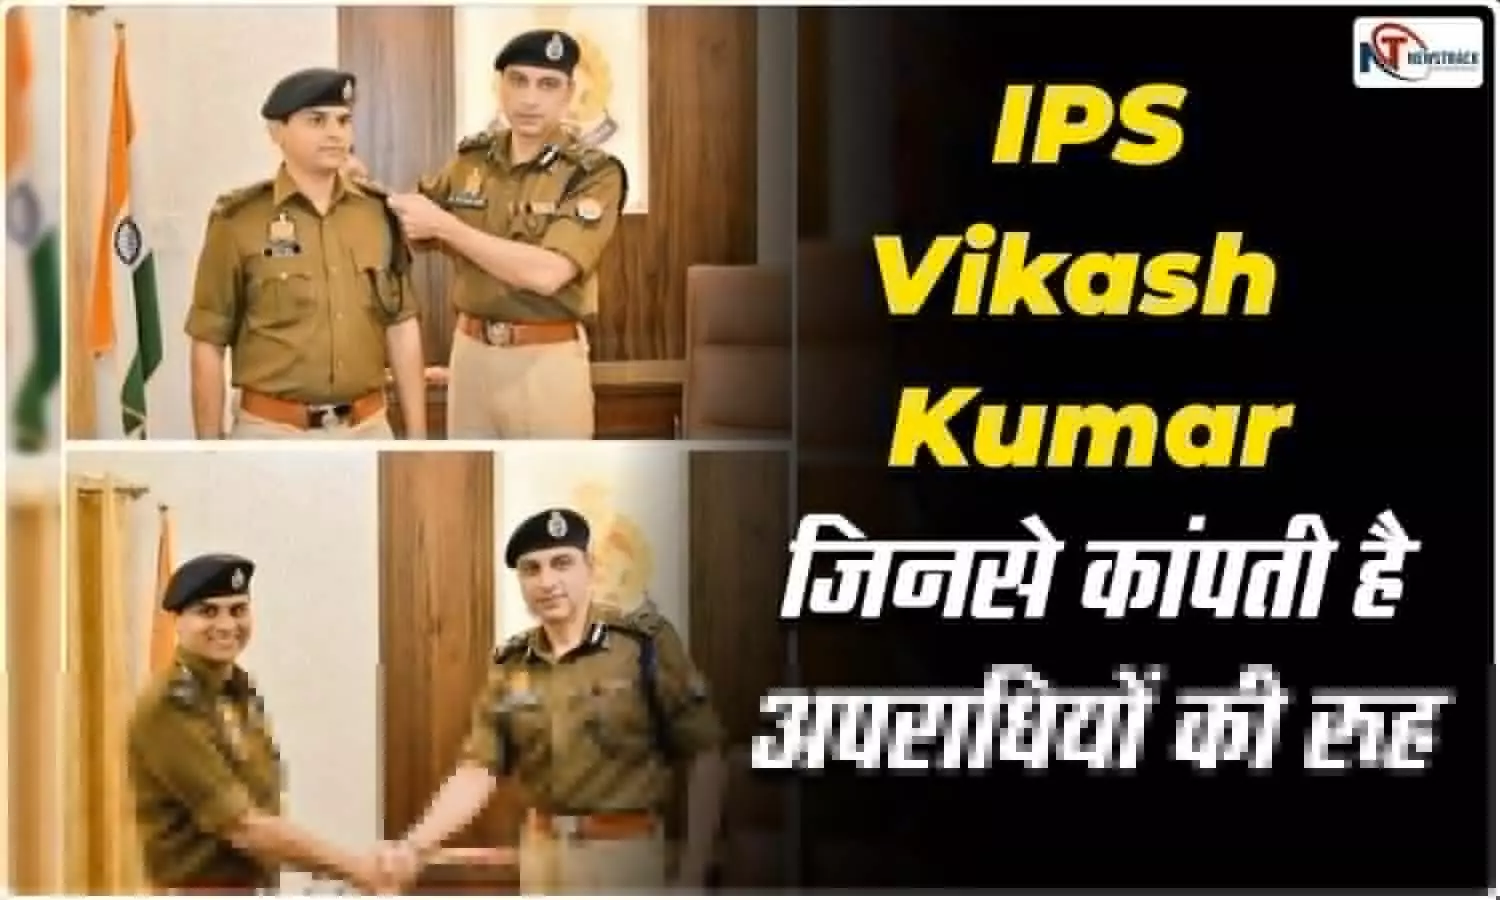 Vikash Kumar, a 2017 batch IPS posted in Agra, is known to be a master of revelations.